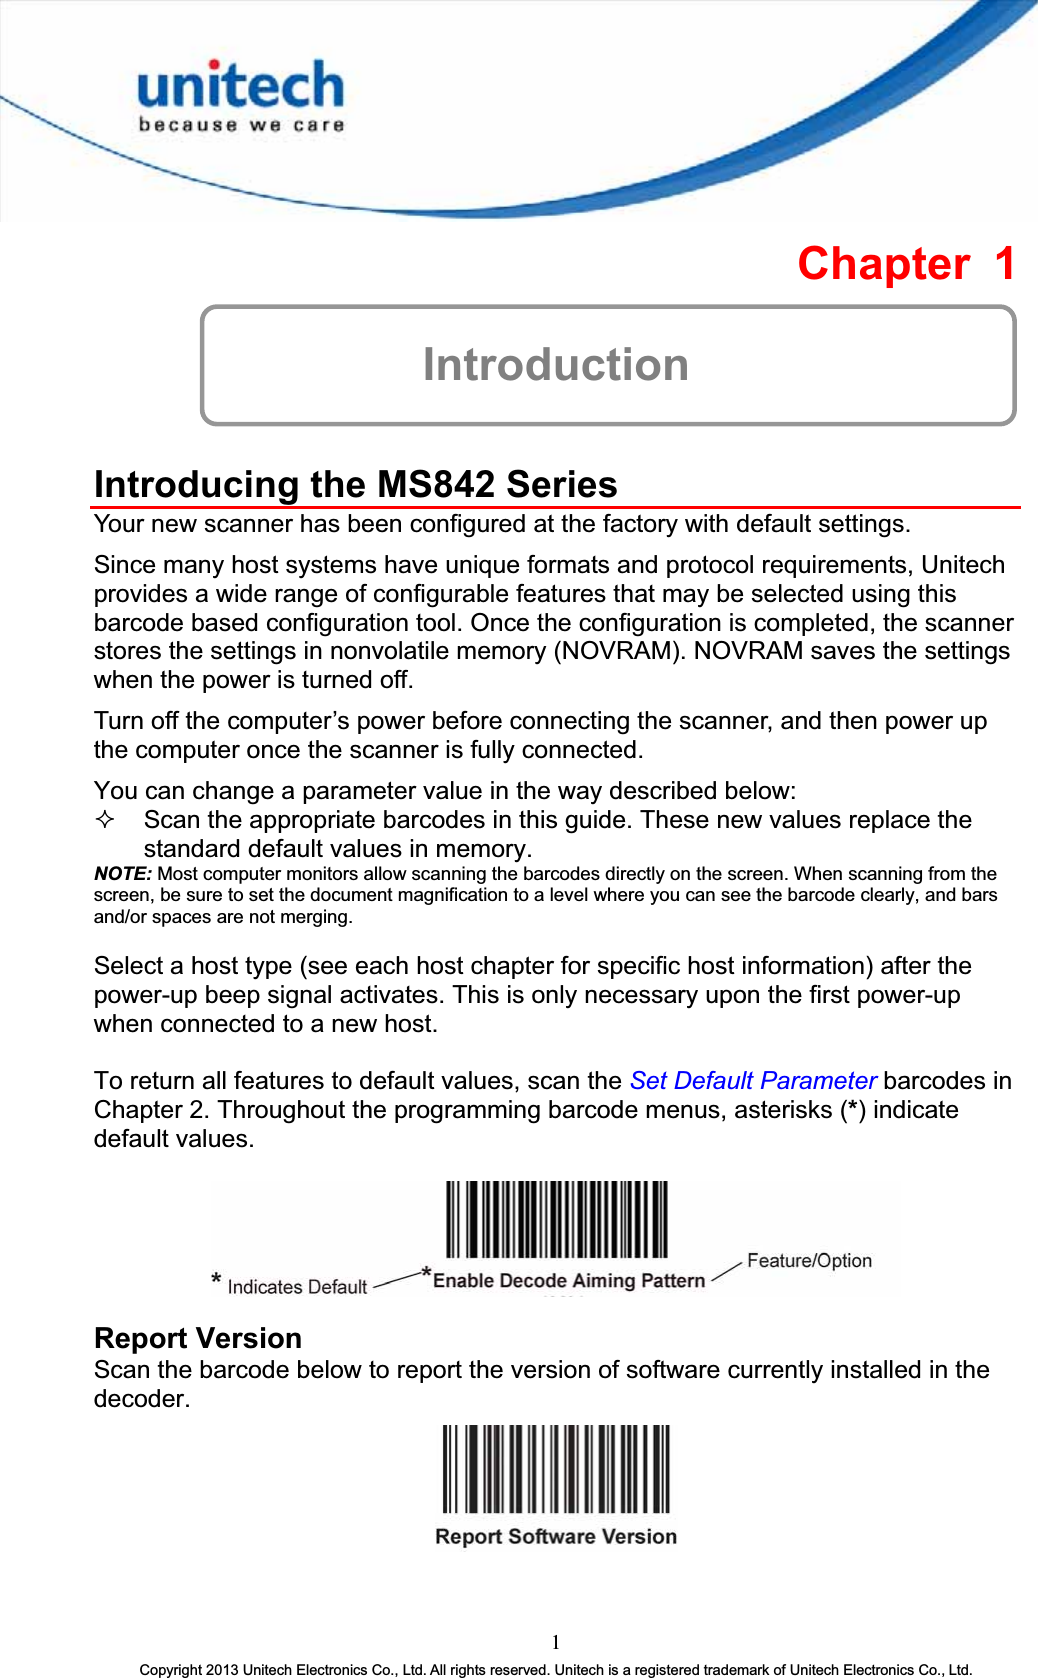 Chapter 1 IntroductionIntroducing the MS842 Series Your new scanner has been configured at the factory with default settings. Since many host systems have unique formats and protocol requirements, Unitech provides a wide range of configurable features that may be selected using this barcode based configuration tool. Once the configuration is completed, the scanner stores the settings in nonvolatile memory (NOVRAM). NOVRAM saves the settings when the power is turned off. Turn off the computer’s power before connecting the scanner, and then power up the computer once the scanner is fully connected. You can change a parameter value in the way described below:  Scan the appropriate barcodes in this guide. These new values replace the standard default values in memory. NOTE: Most computer monitors allow scanning the barcodes directly on the screen. When scanning from the screen, be sure to set the document magnification to a level where you can see the barcode clearly, and bars and/or spaces are not merging.Select a host type (see each host chapter for specific host information) after the power-up beep signal activates. This is only necessary upon the first power-up when connected to a new host. To return all features to default values, scan the Set Default Parameter barcodes in Chapter 2. Throughout the programming barcode menus, asterisks (*) indicate default values.Report Version Scan the barcode below to report the version of software currently installed in the decoder.1Copyright 2013 Unitech Electronics Co., Ltd. All rights reserved. Unitech is a registered trademark of Unitech Electronics Co., Ltd. 